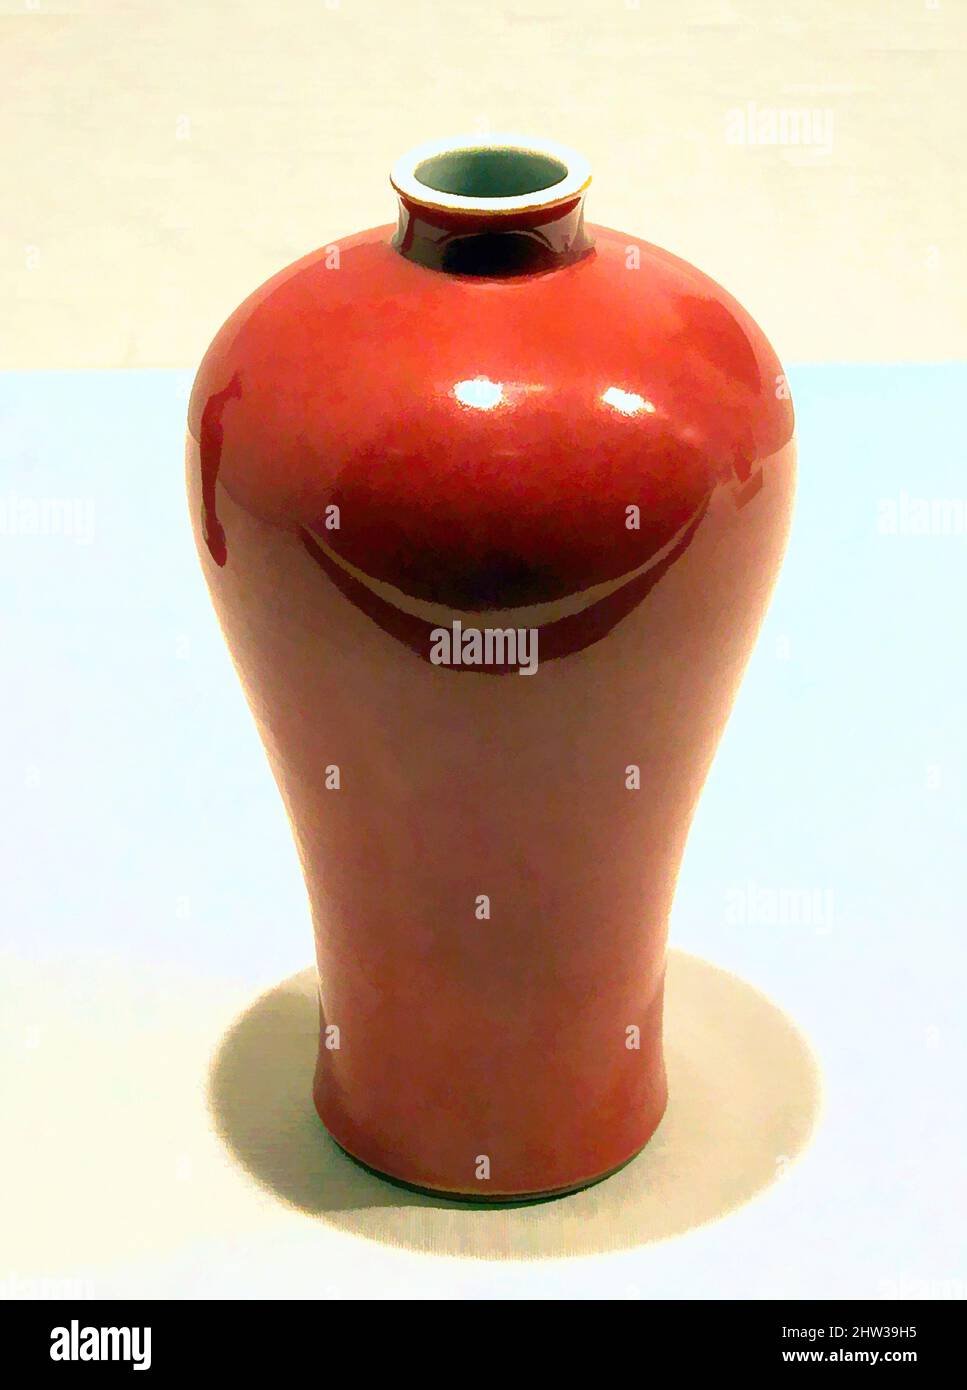 Art inspired by Vase in Meiping Shape, Qing dynasty (1644–1911), late 18th–early 19th century, China, Porcelain with coral-red glaze (Jingdezhen ware), H. 6 3/4 in. (17.1 cm), Ceramics, Classic works modernized by Artotop with a splash of modernity. Shapes, color and value, eye-catching visual impact on art. Emotions through freedom of artworks in a contemporary way. A timeless message pursuing a wildly creative new direction. Artists turning to the digital medium and creating the Artotop NFT Stock Photo